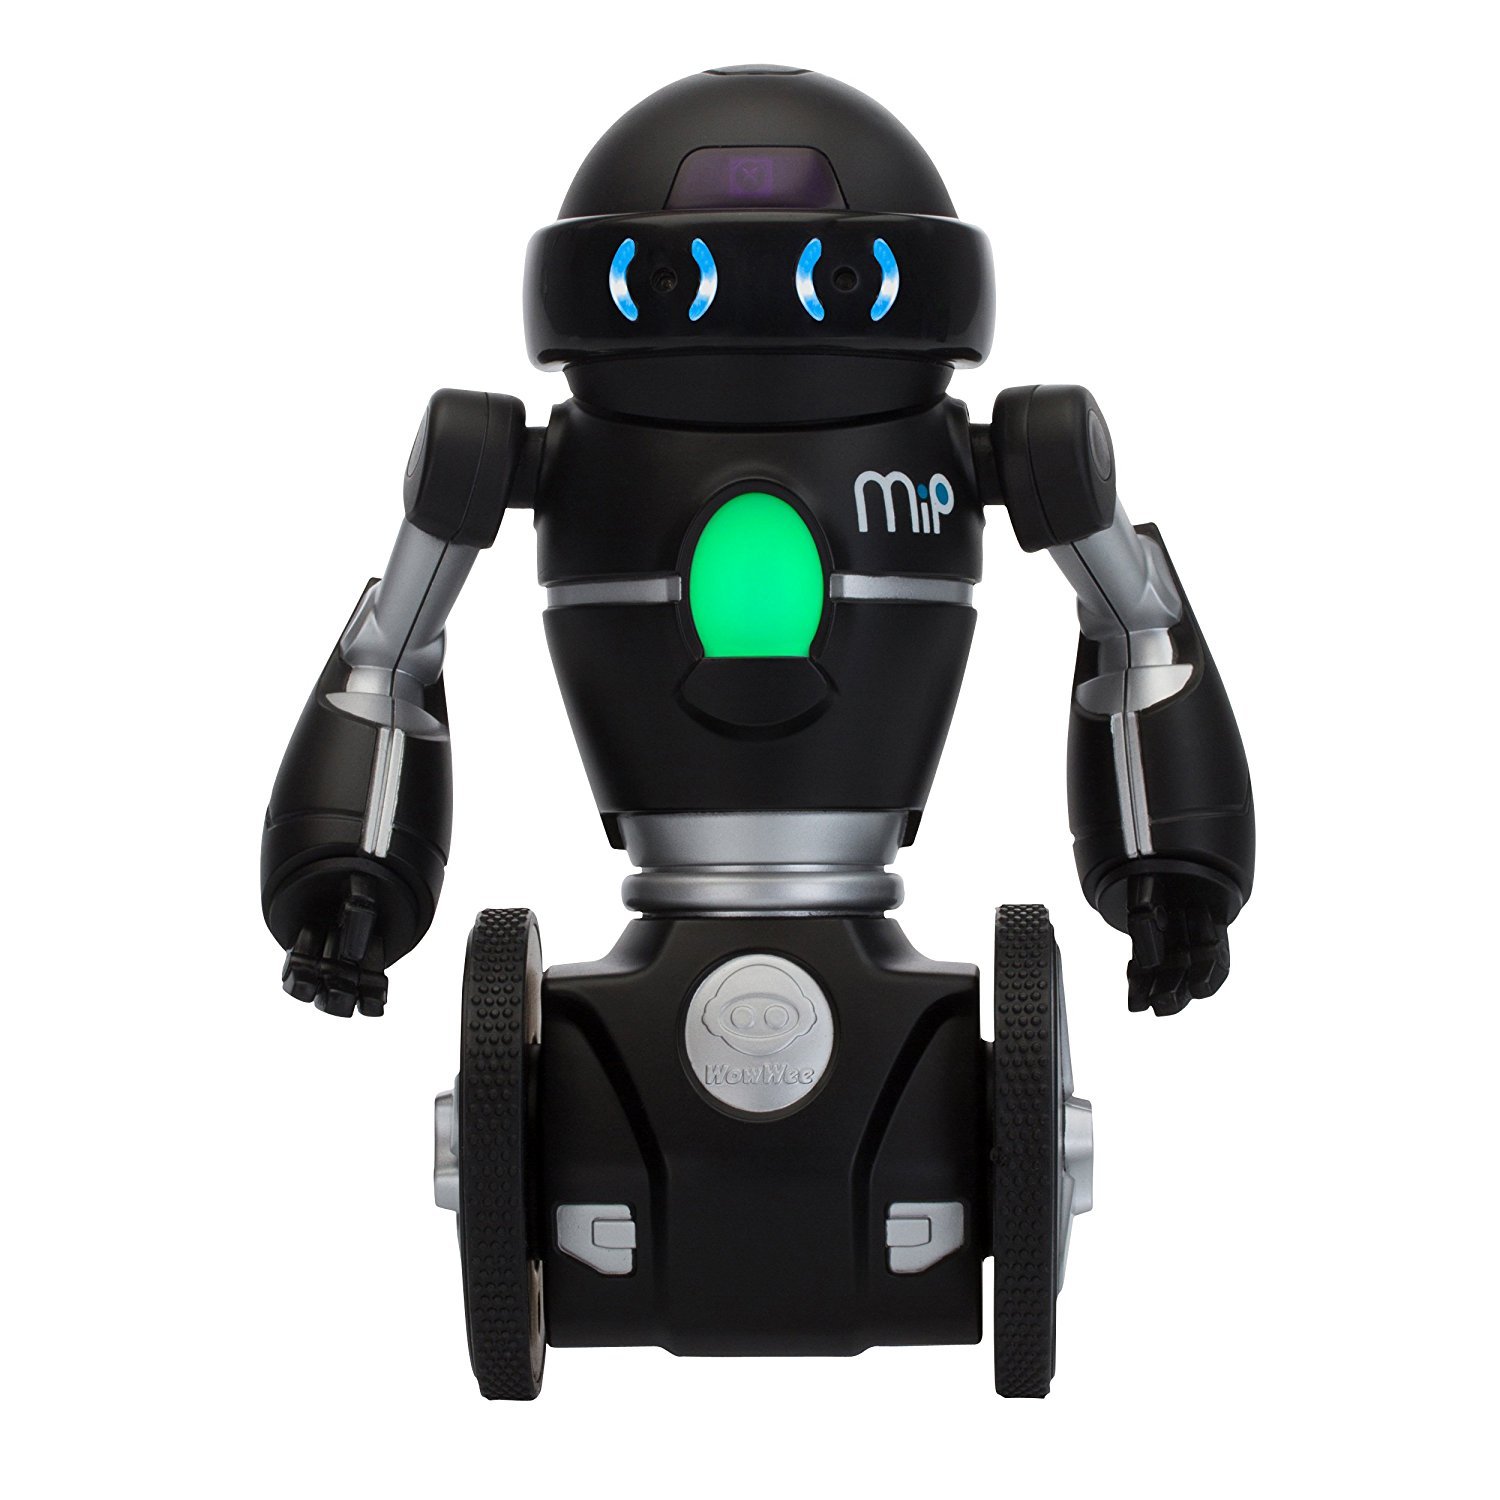 WowWee - MiP The Toy Robot